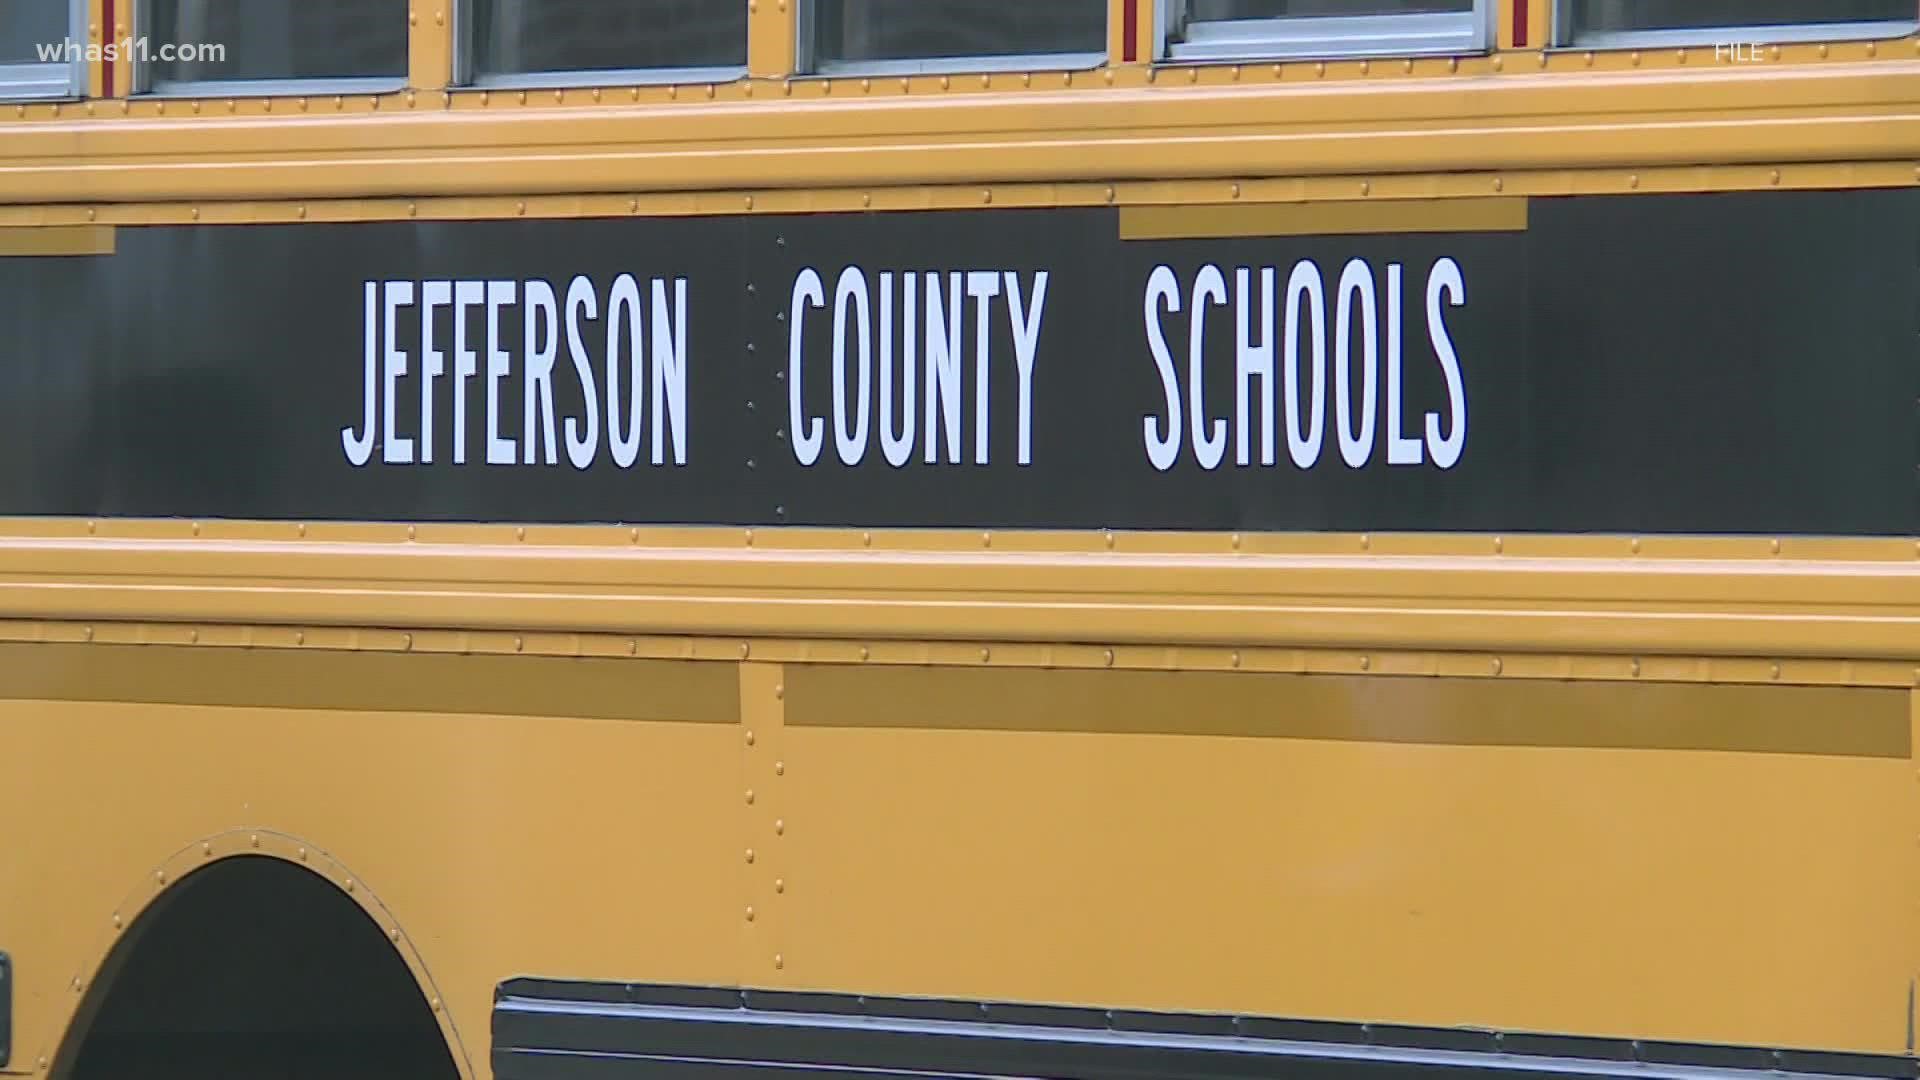 Jefferson County Public Schools (JCPS) could be changing the way your child attends school with a new school choice proposal.